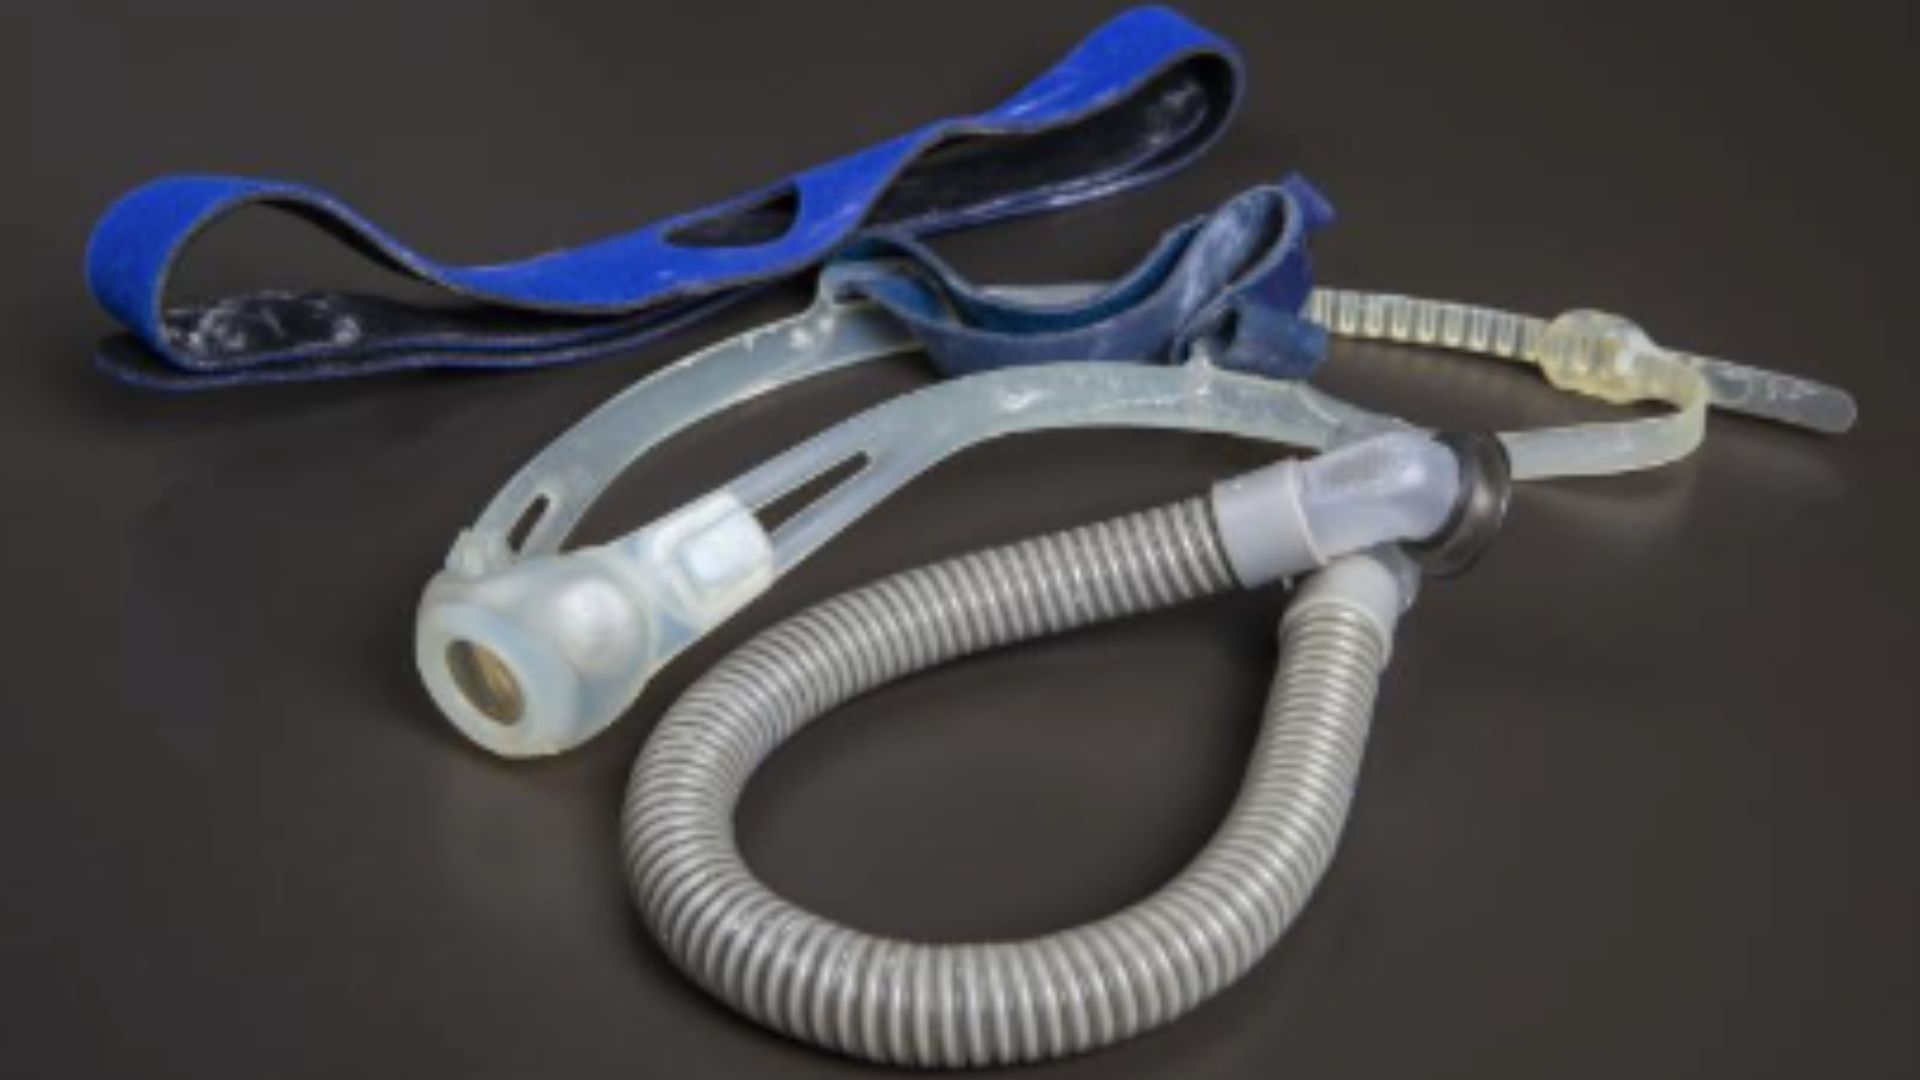 ResMed "nasal pillow" breathing mask with a blue fabric headband and clear plastic nasal "pillows." A short gray accordion breathing tube is attached.